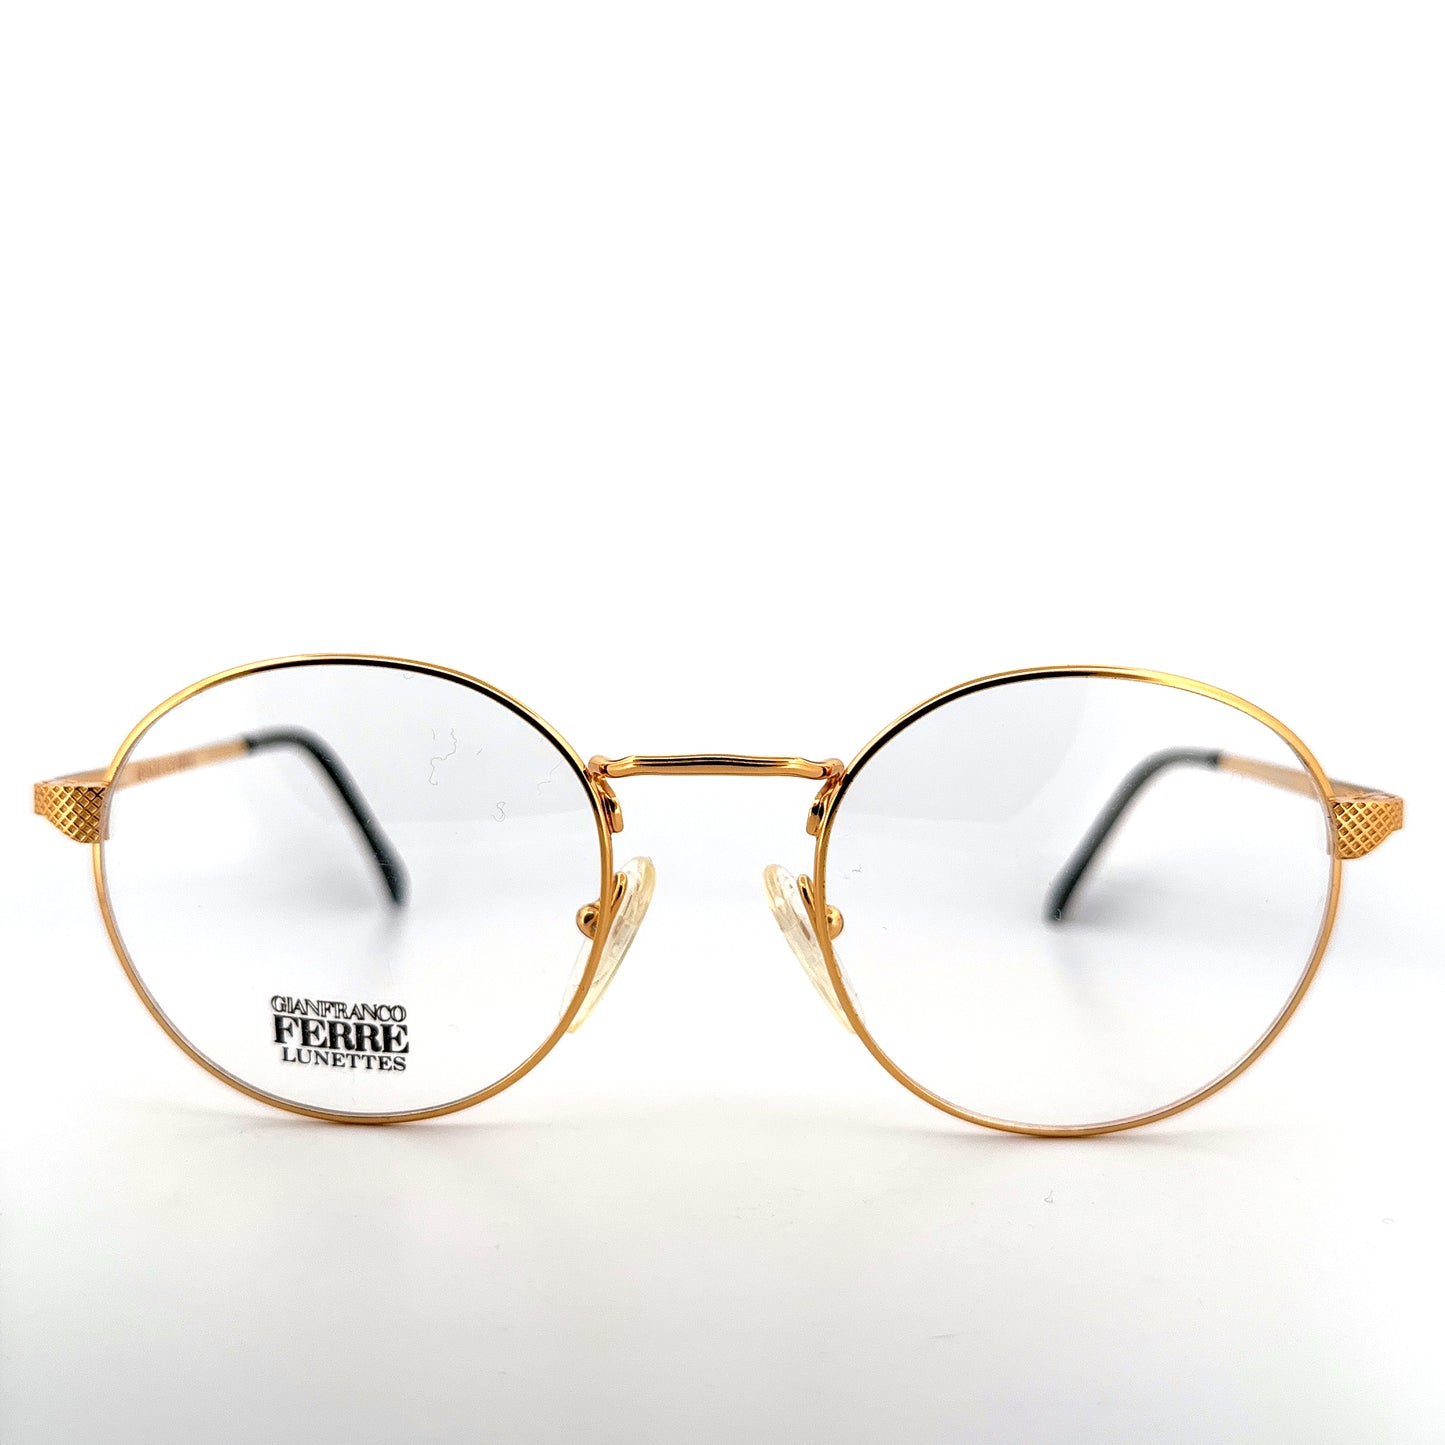 Vintage 90s Gianfranco Ferre Round Eyeglasses Frames Mod 69 Size 49-20 Made in Italy